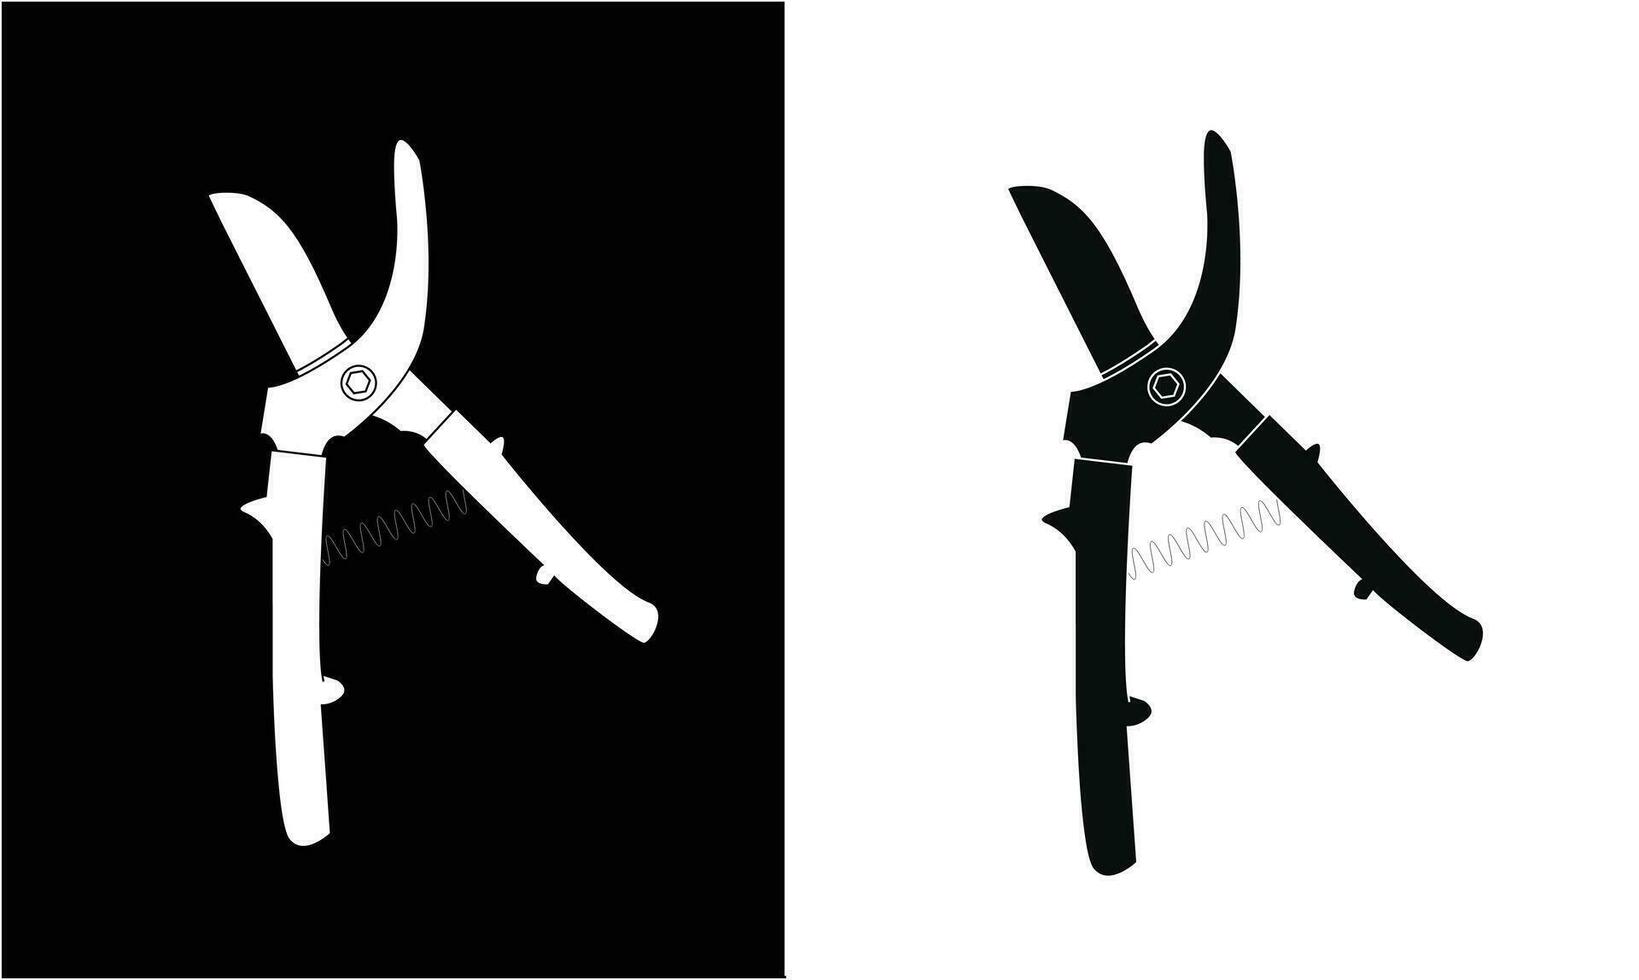 Garden secateur icon vector illustration. Icon of pruning shears, garden hand pruners, pruning scissors, garden scissors. Gardening concept. Hand holding secateurs to cut twigs and branches.